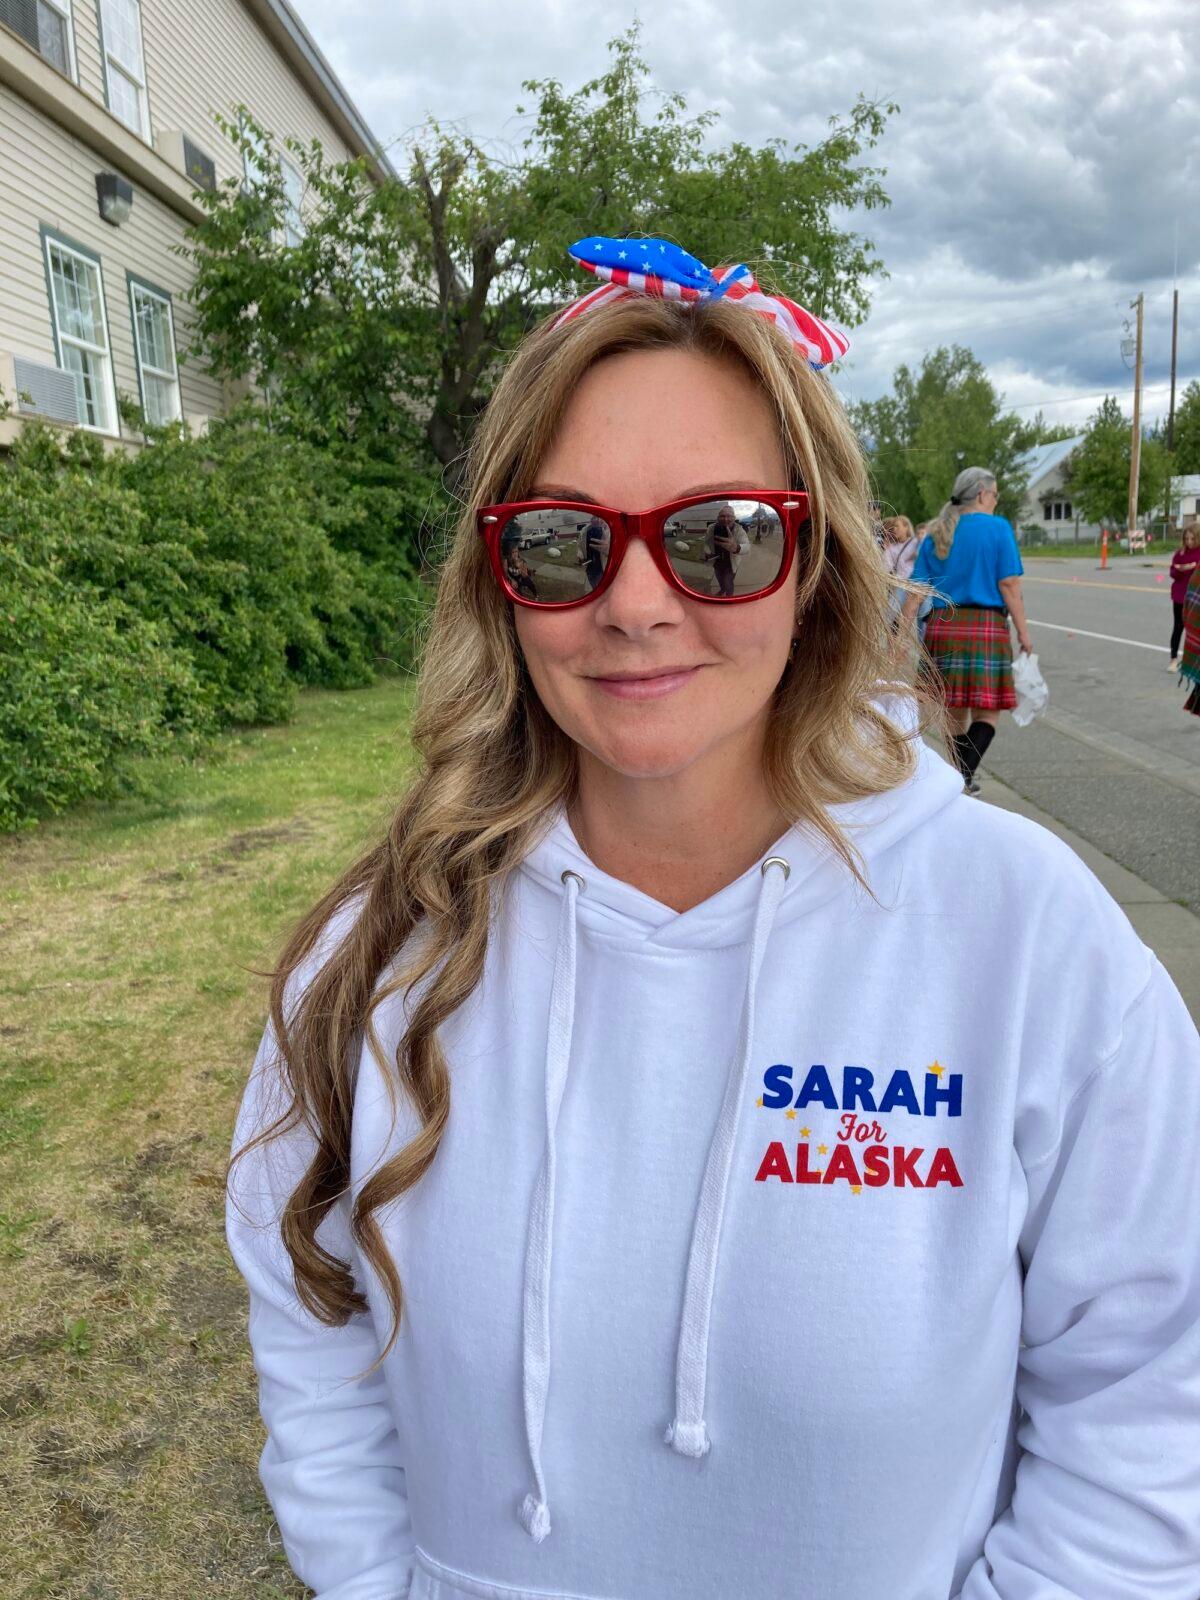 Leslie Wright of Alaska said she voted for Sarah Palin for U.S. Congress in the June 11 special primary because she's "the biggest dog in this fight." (Allan Stein/The Epoch Times)